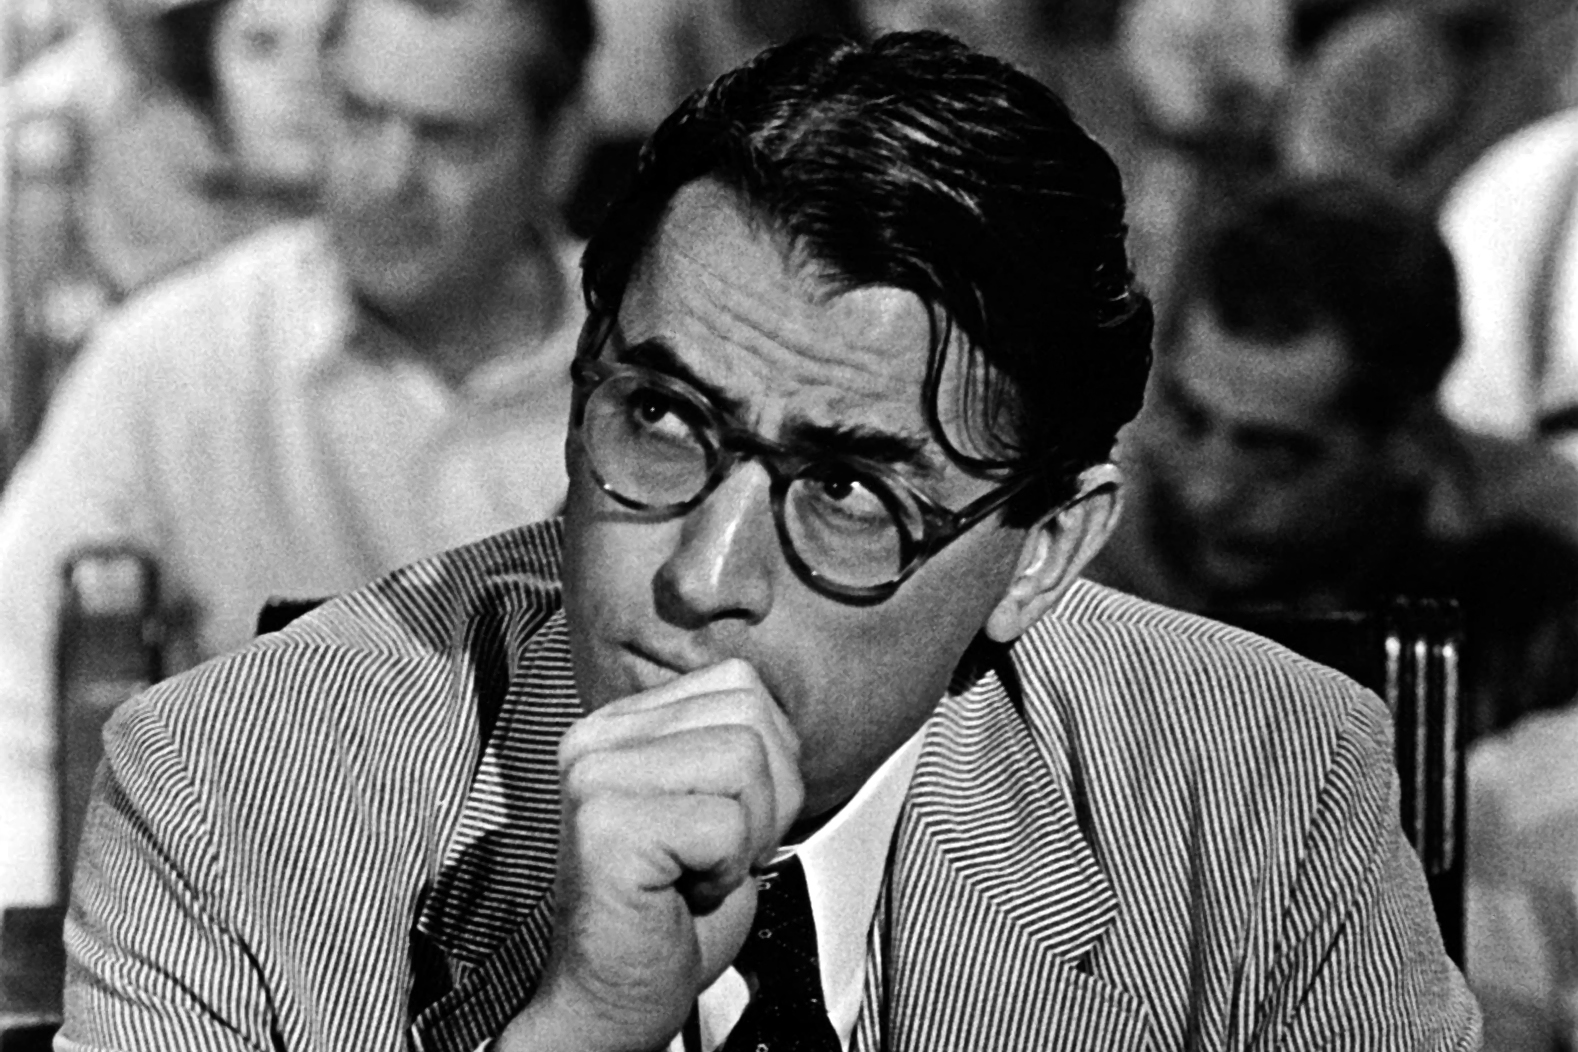 Gregory Peck: The Eyes Have It